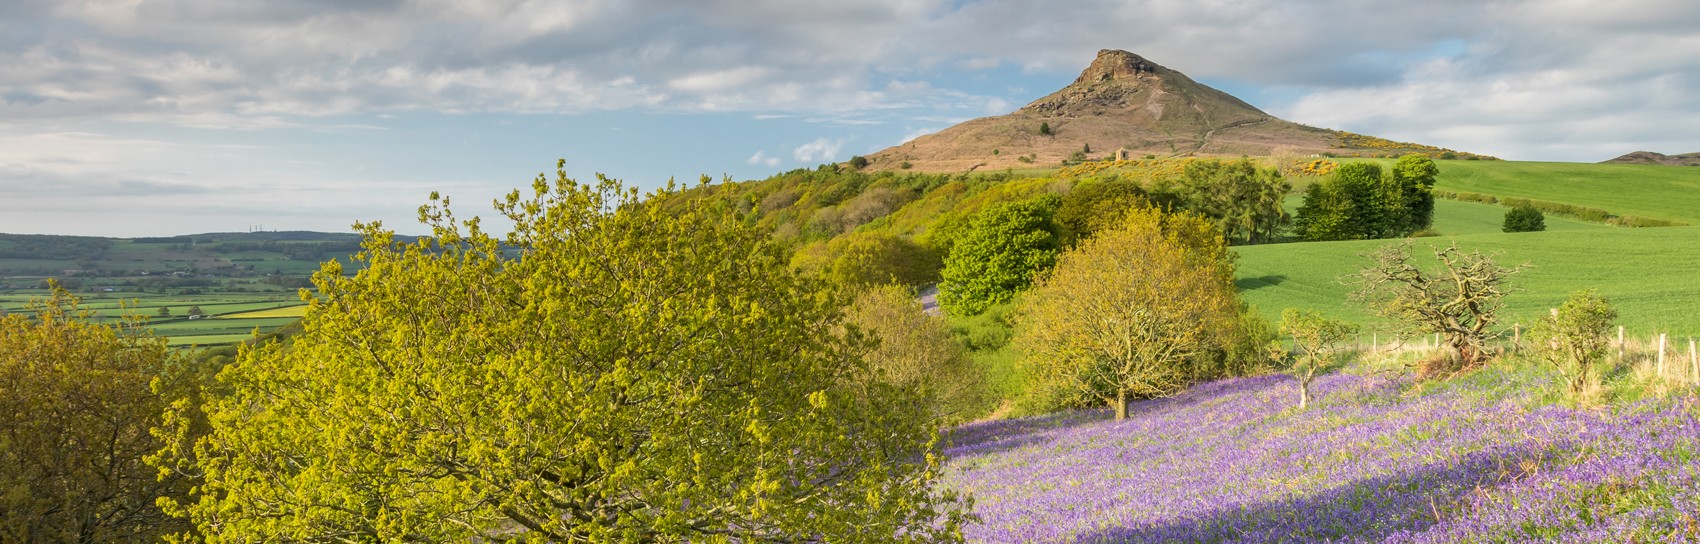 Bluebells at Roseberry Topping in Yorkshire. Photograph by MATT HILLIER